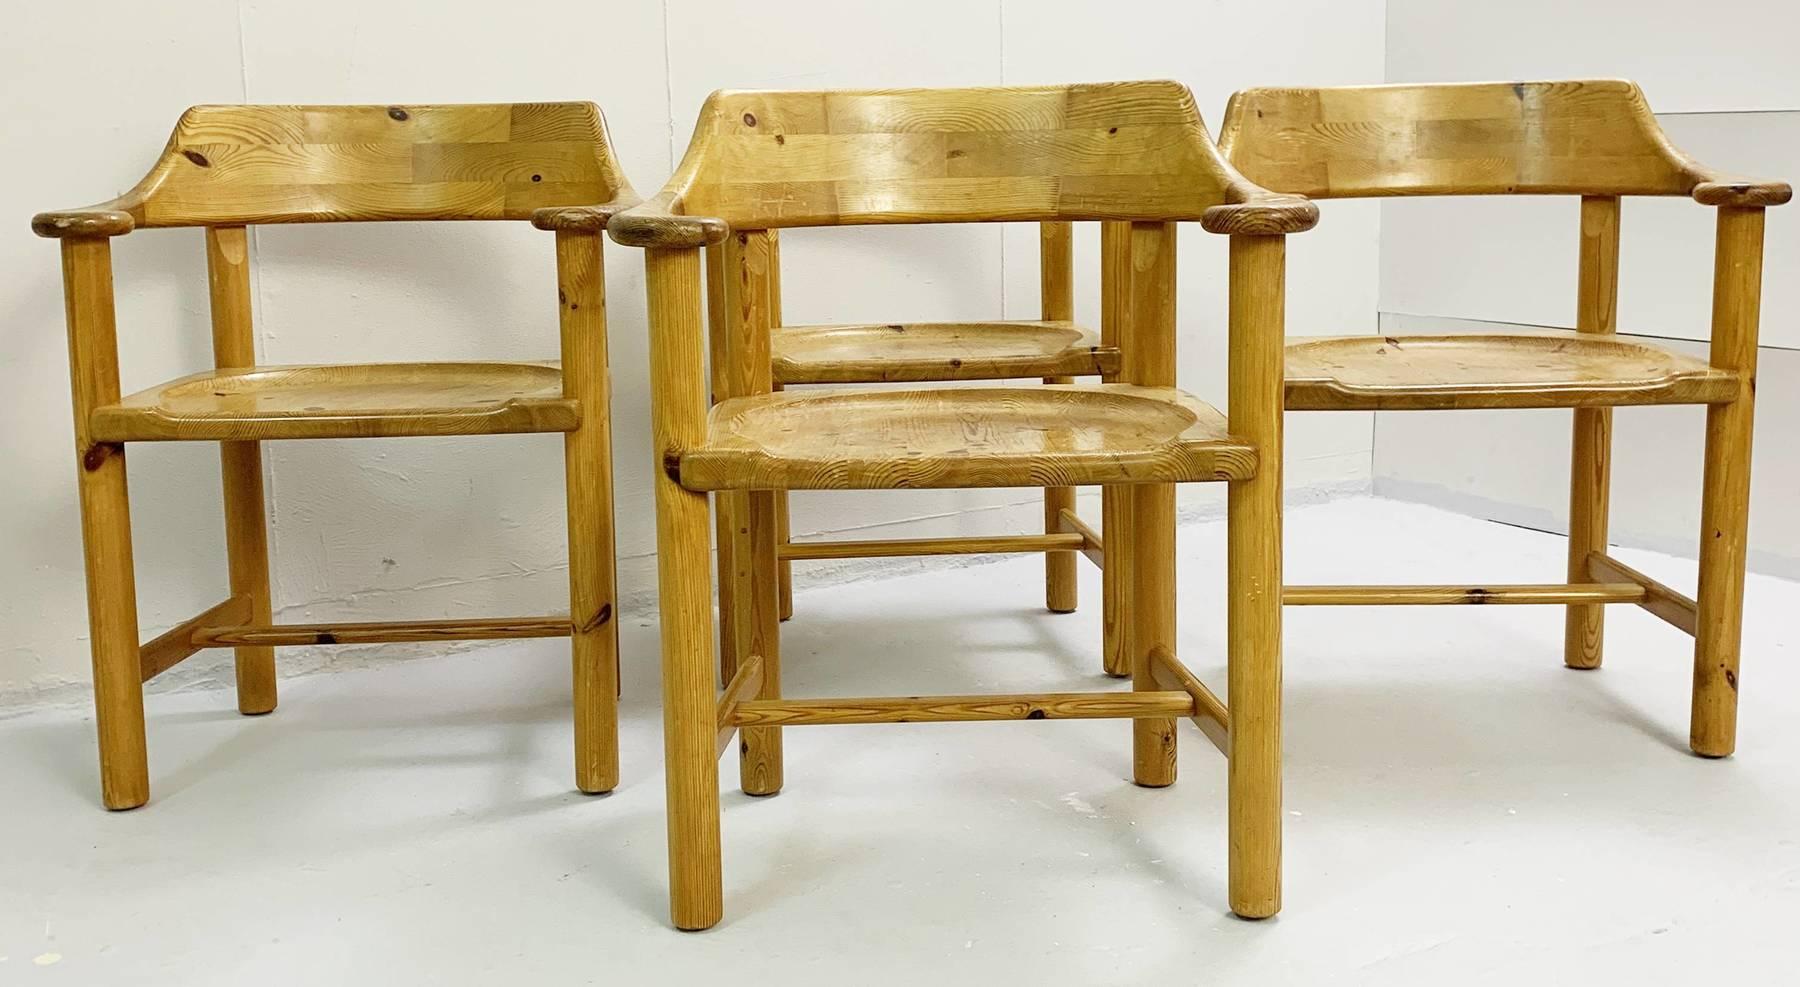 Set of 4 wood chairs.